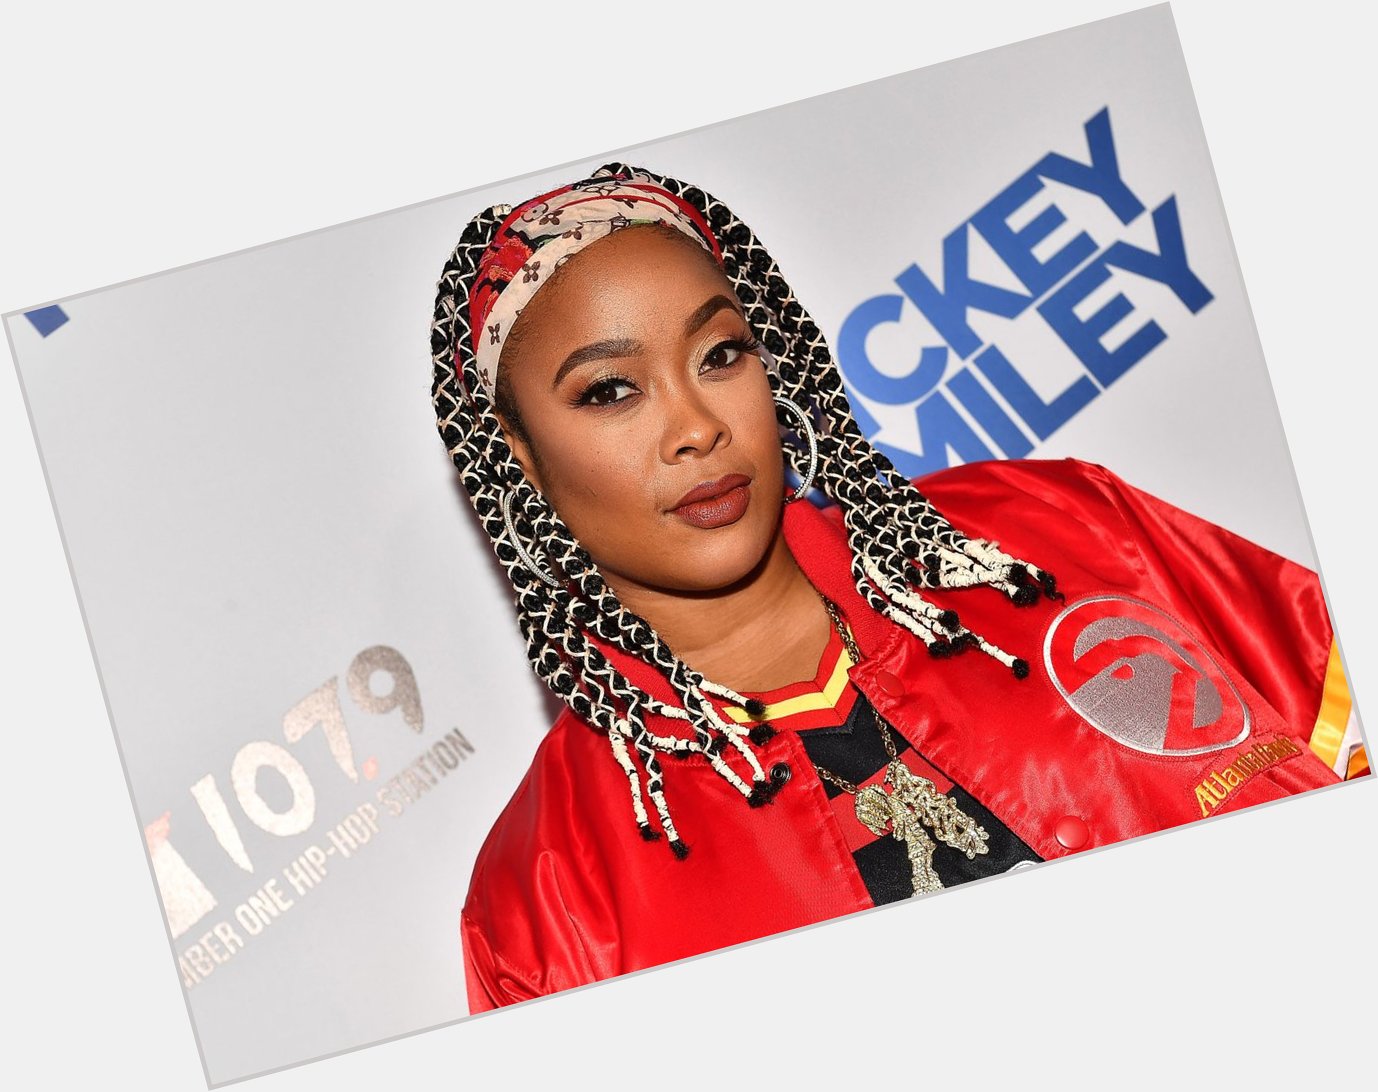 Happy birthday to the one and only Da Brat who celebrated her 48th birthday April 14th!  